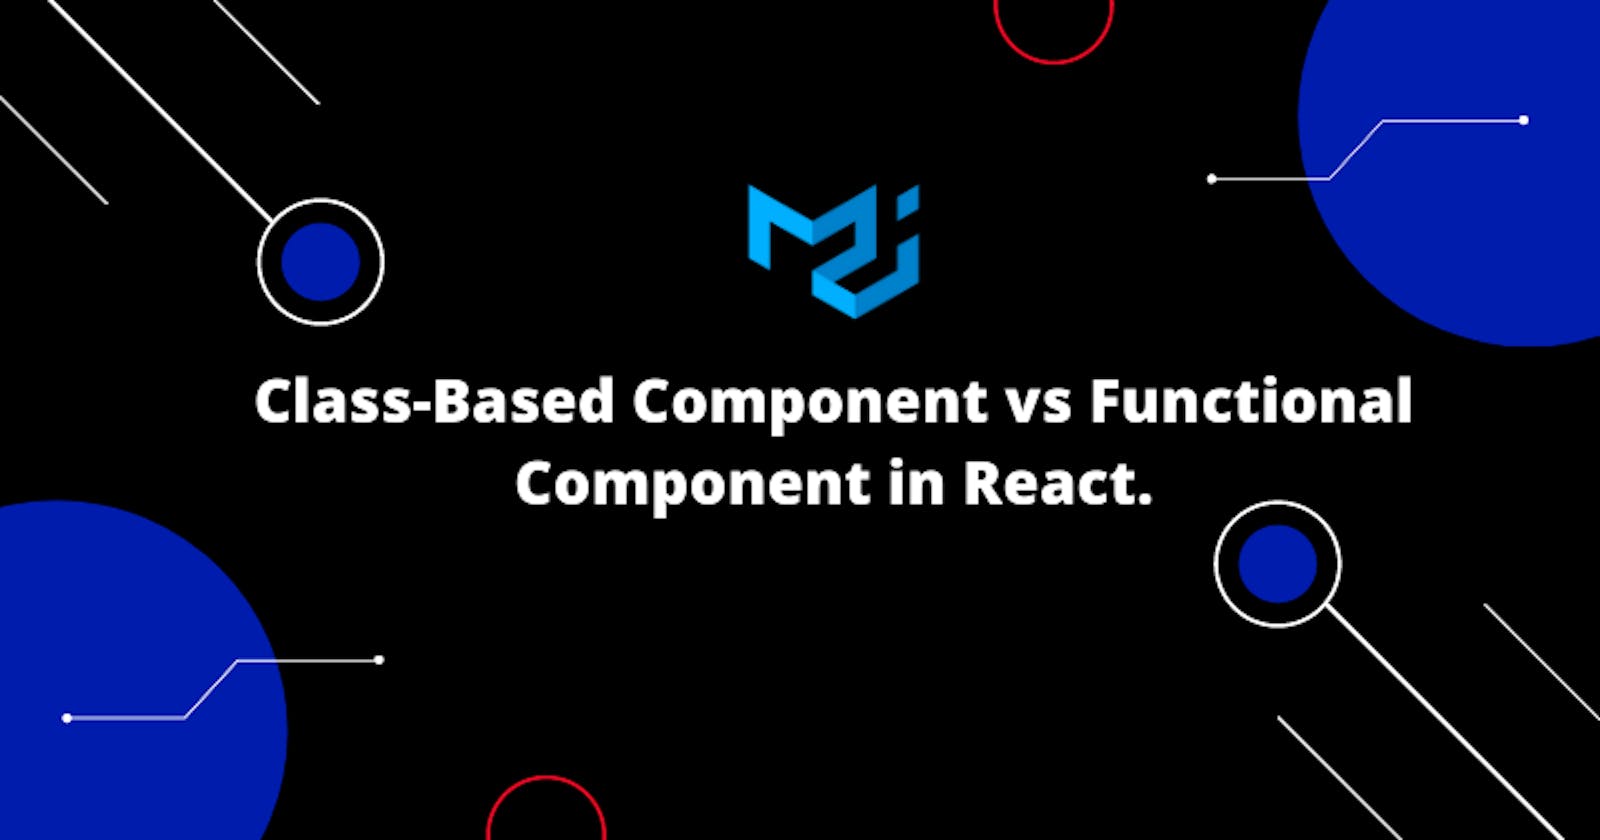 Class-Based Component vs Functional Component 
in React.